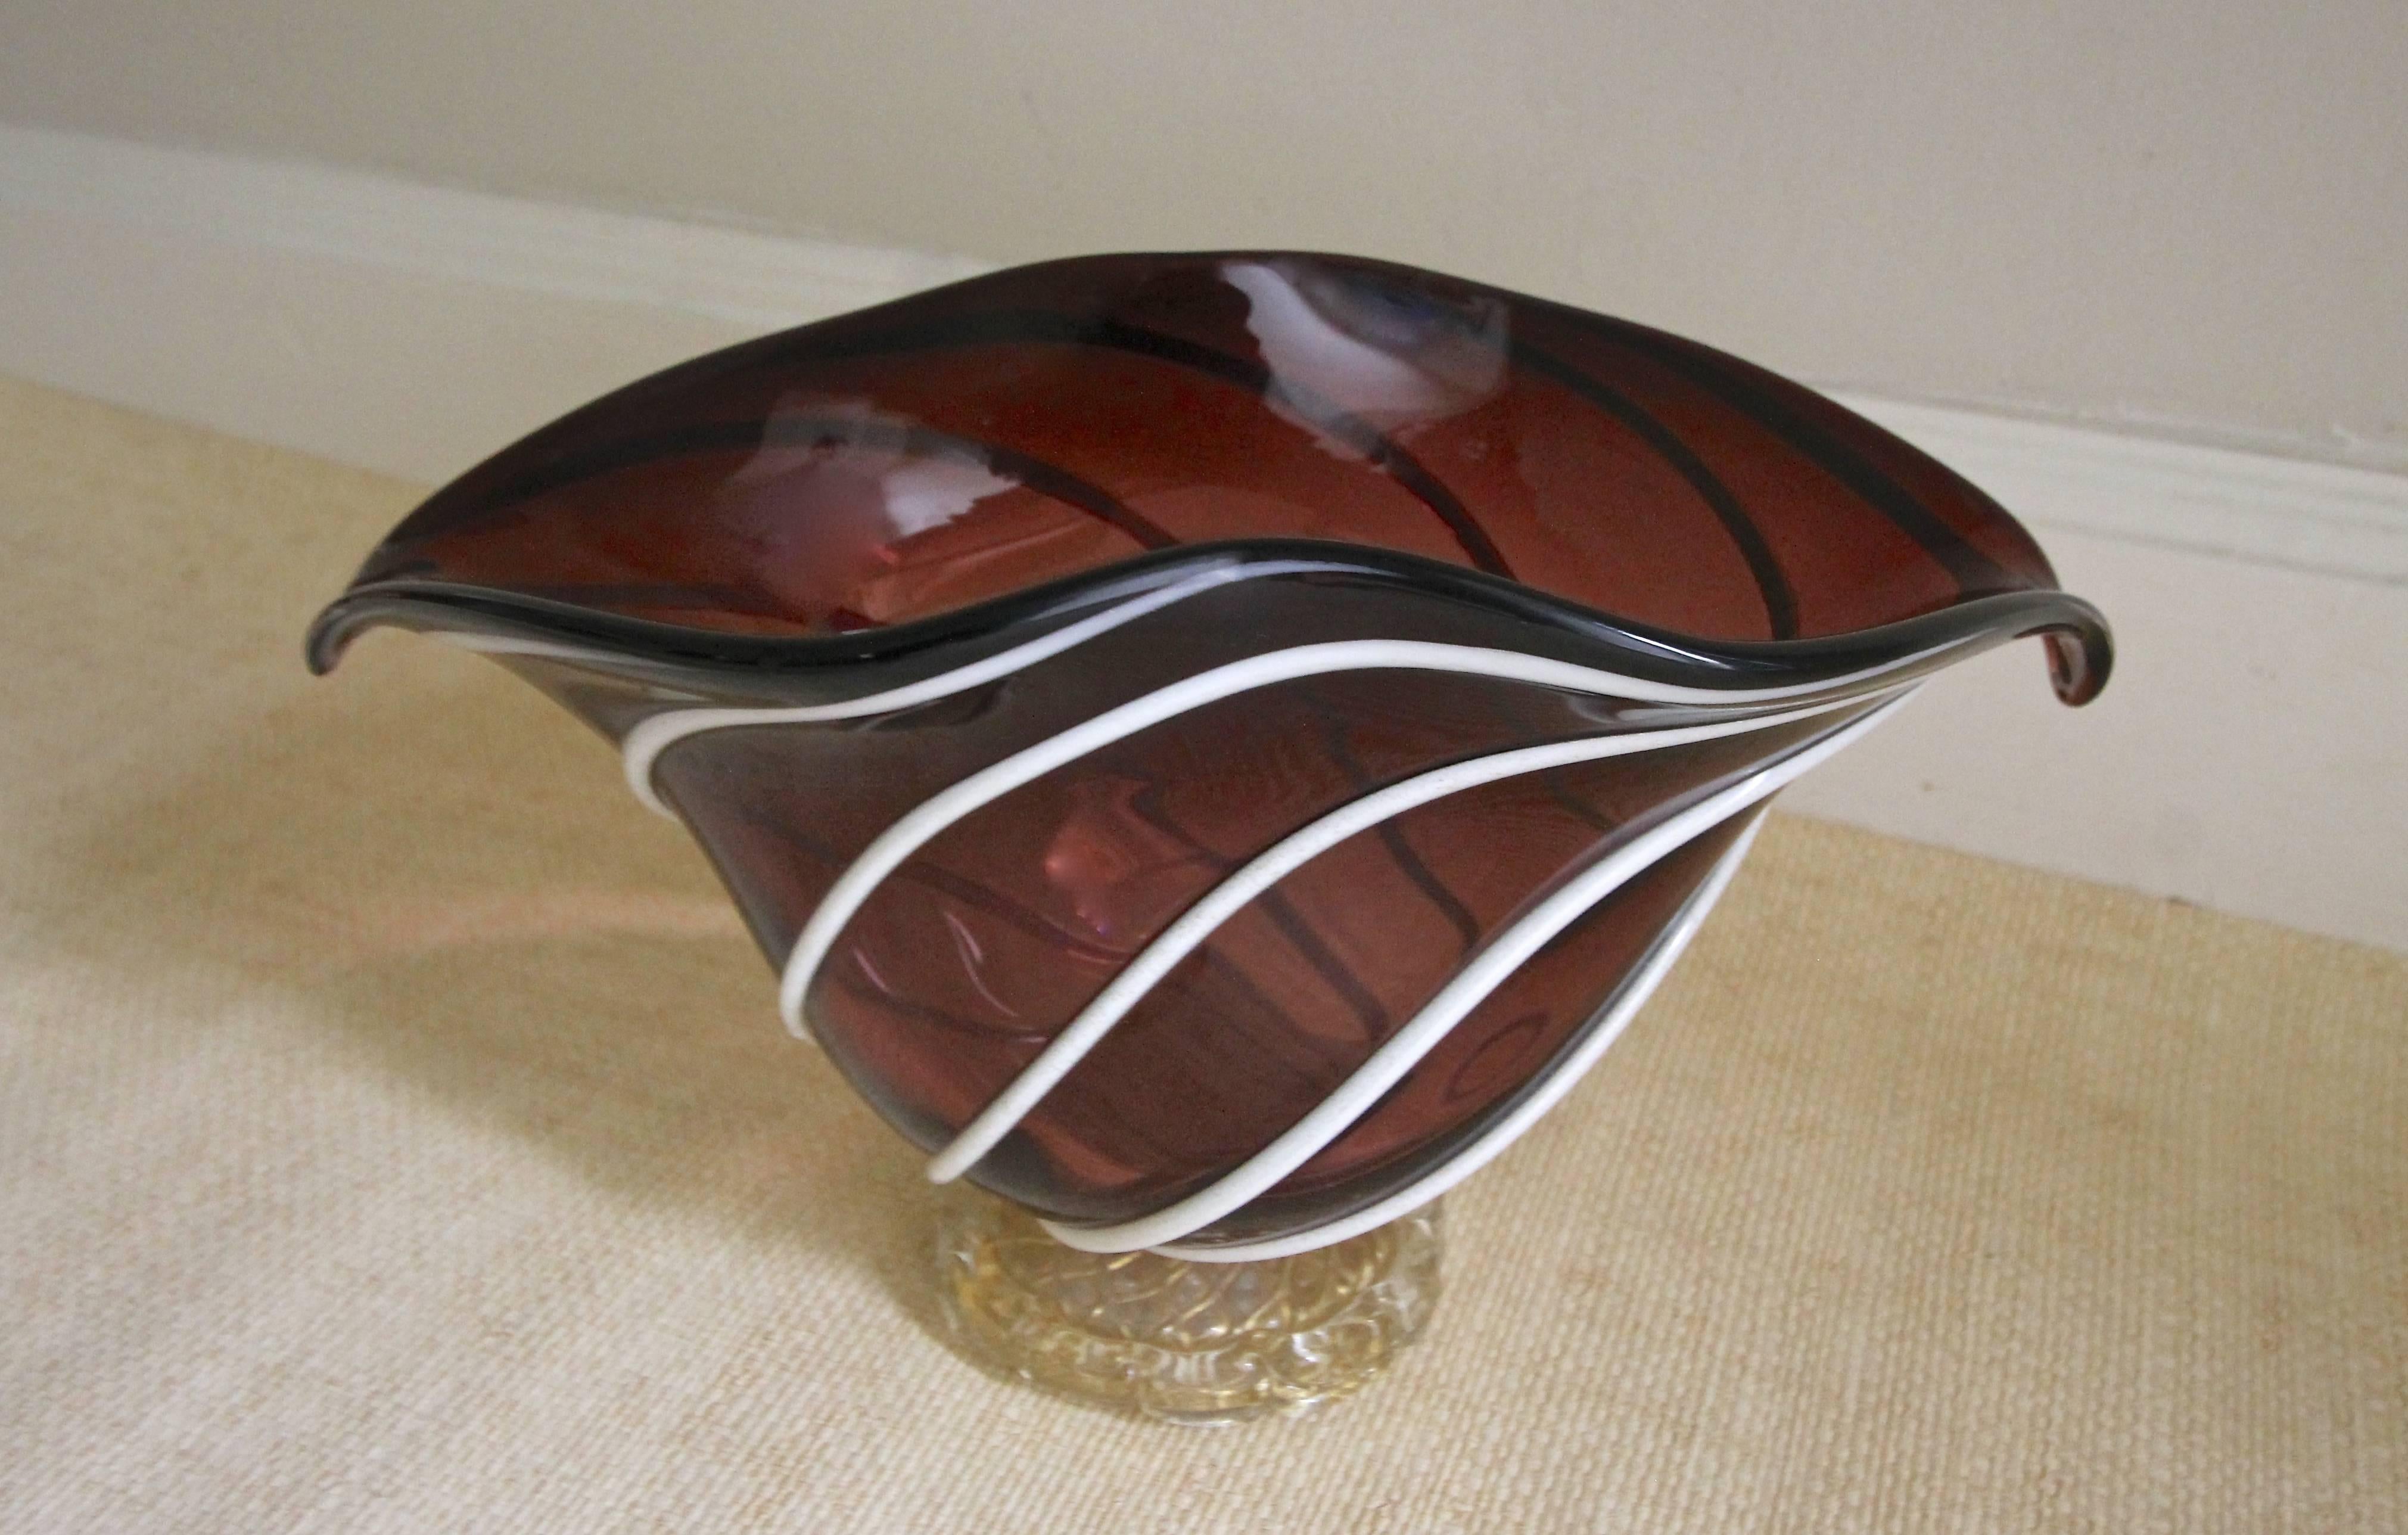 Barovier & Toso Italian handblown glass bowl or centerpiece with clear and gold base and applied lattimo white applied stripes over a rich maroon glass.